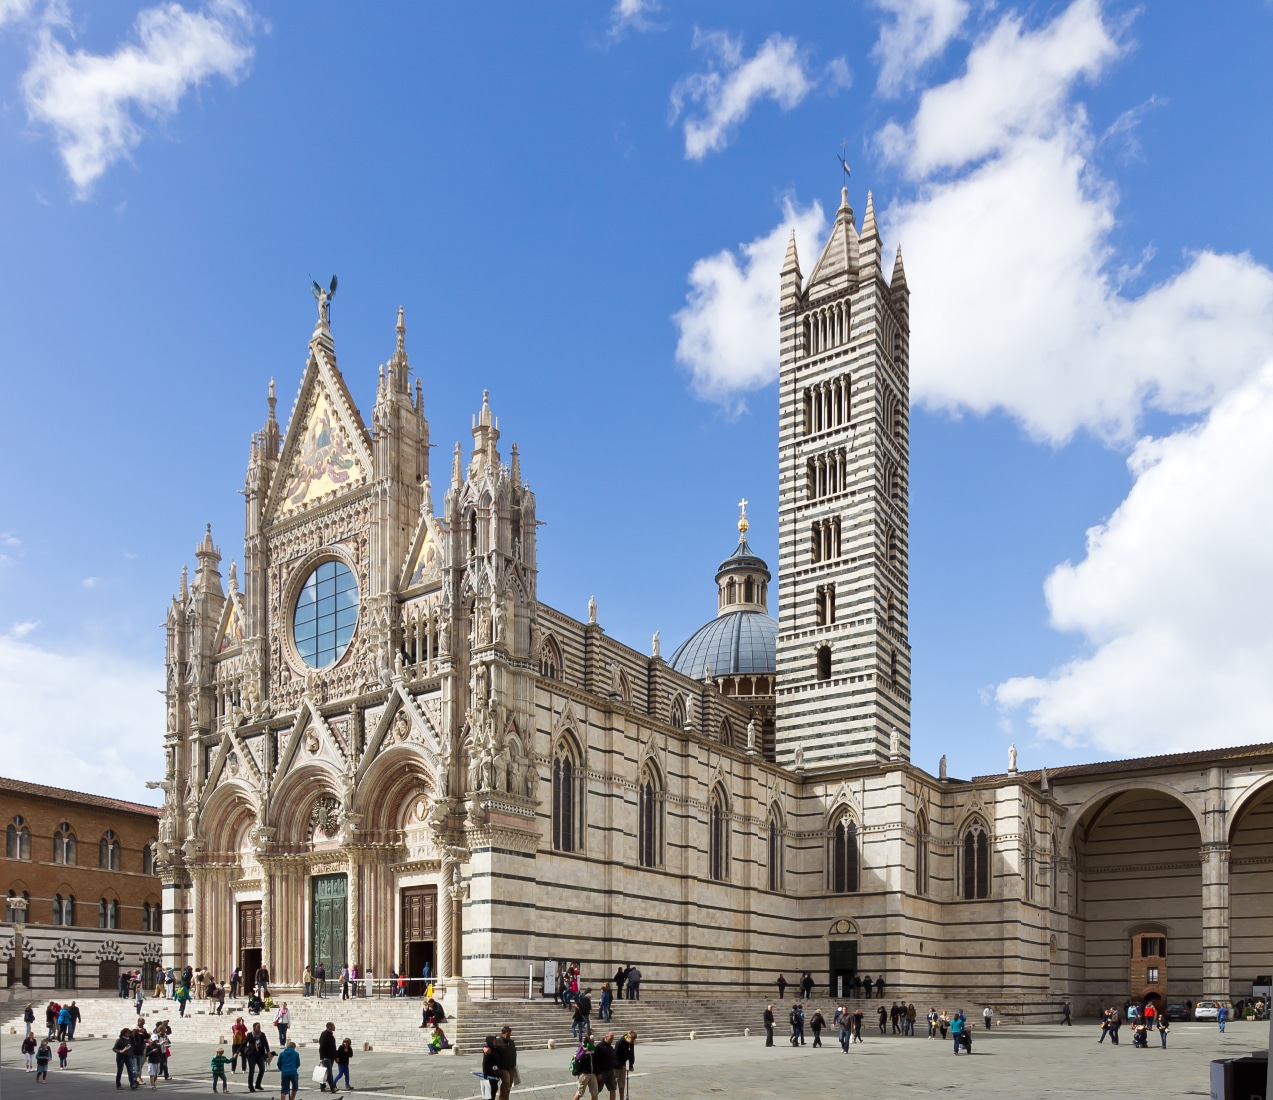 The Cathedral of Siena